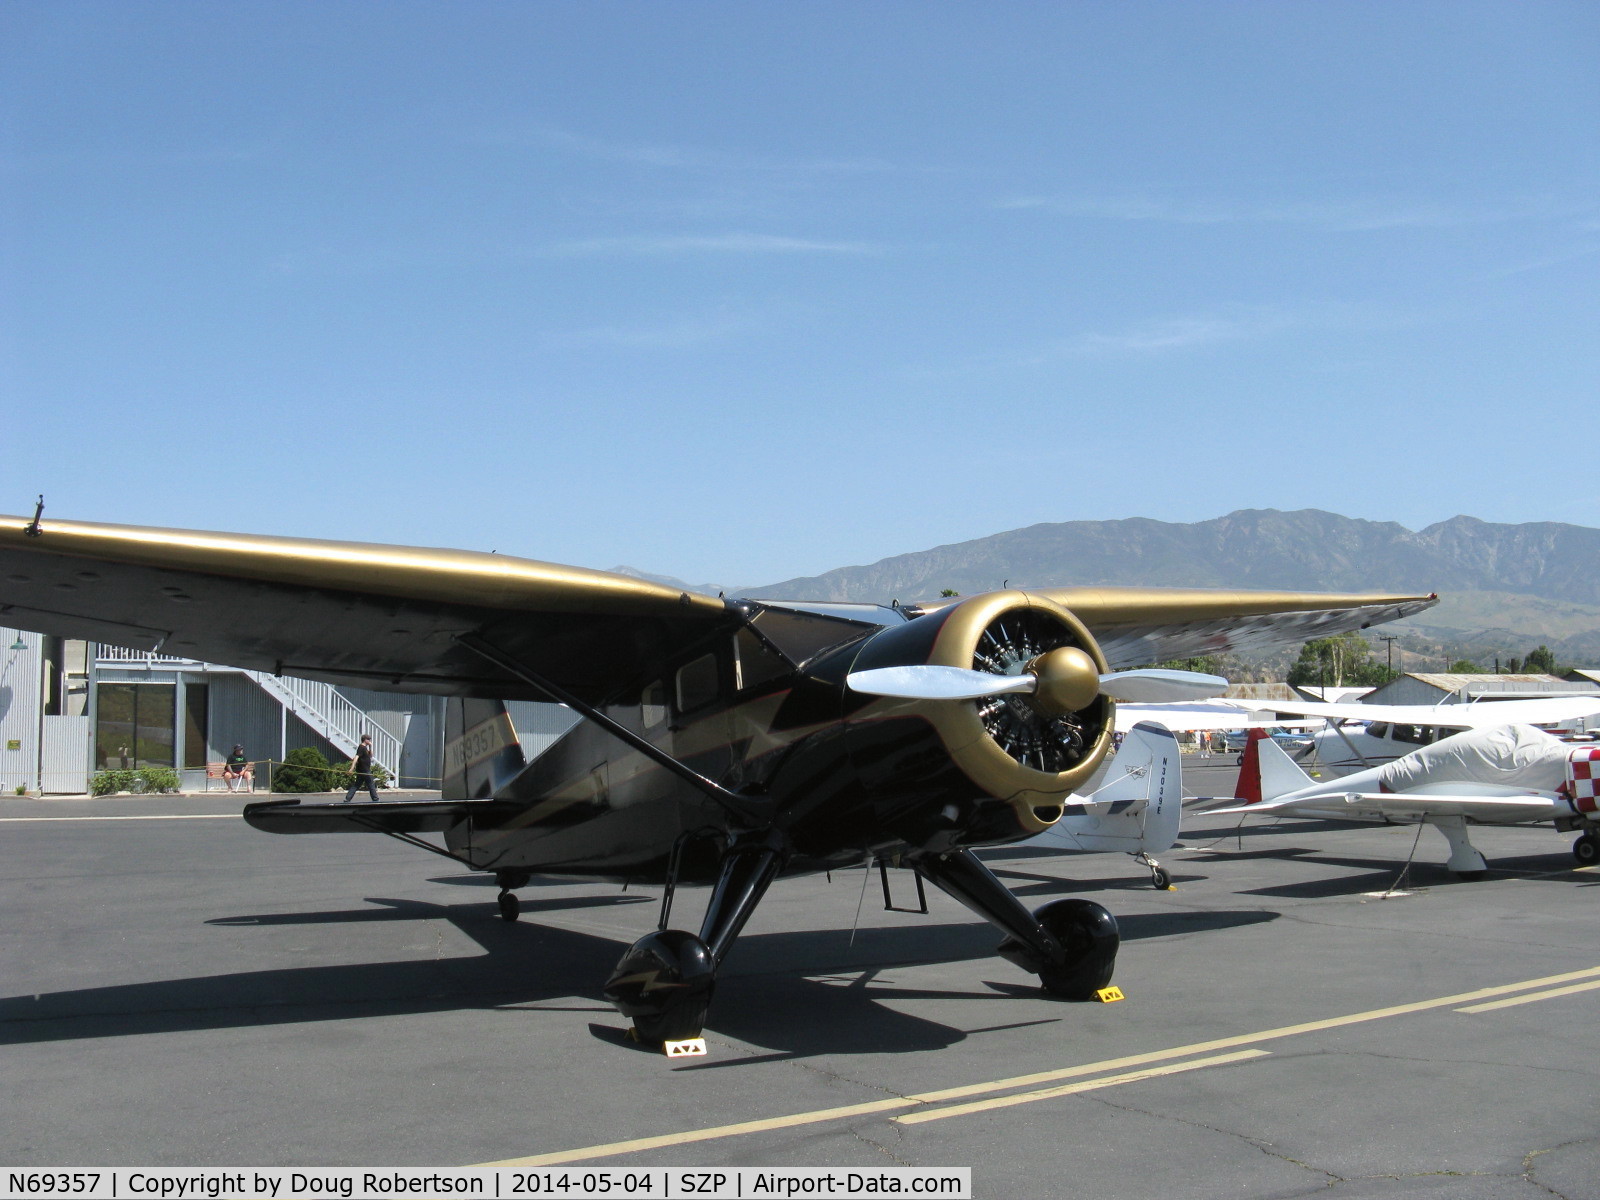 N69357, 1944 Stinson V77 Reliant C/N 77-448, 1944 Stinson V-77 by Vultee Aircraft, Lycoming R-680-13 9 cylinder radial 300 Hp, beautiful distinctive tapered gull wings